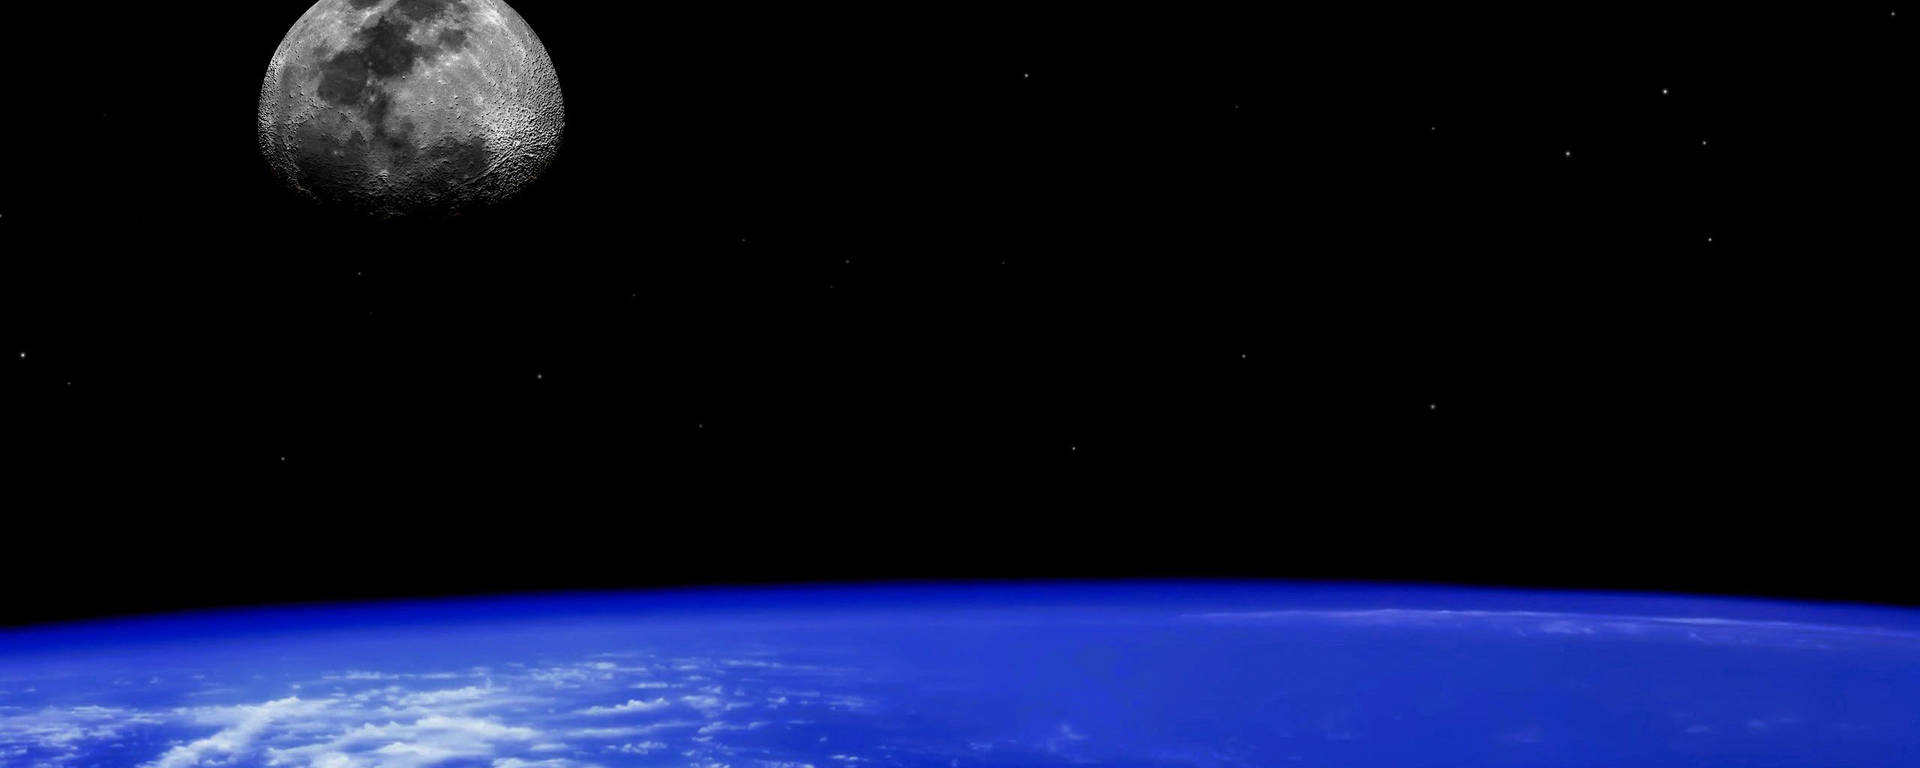 Cosmic Perspective Of Earth For Monitor Wallpaper